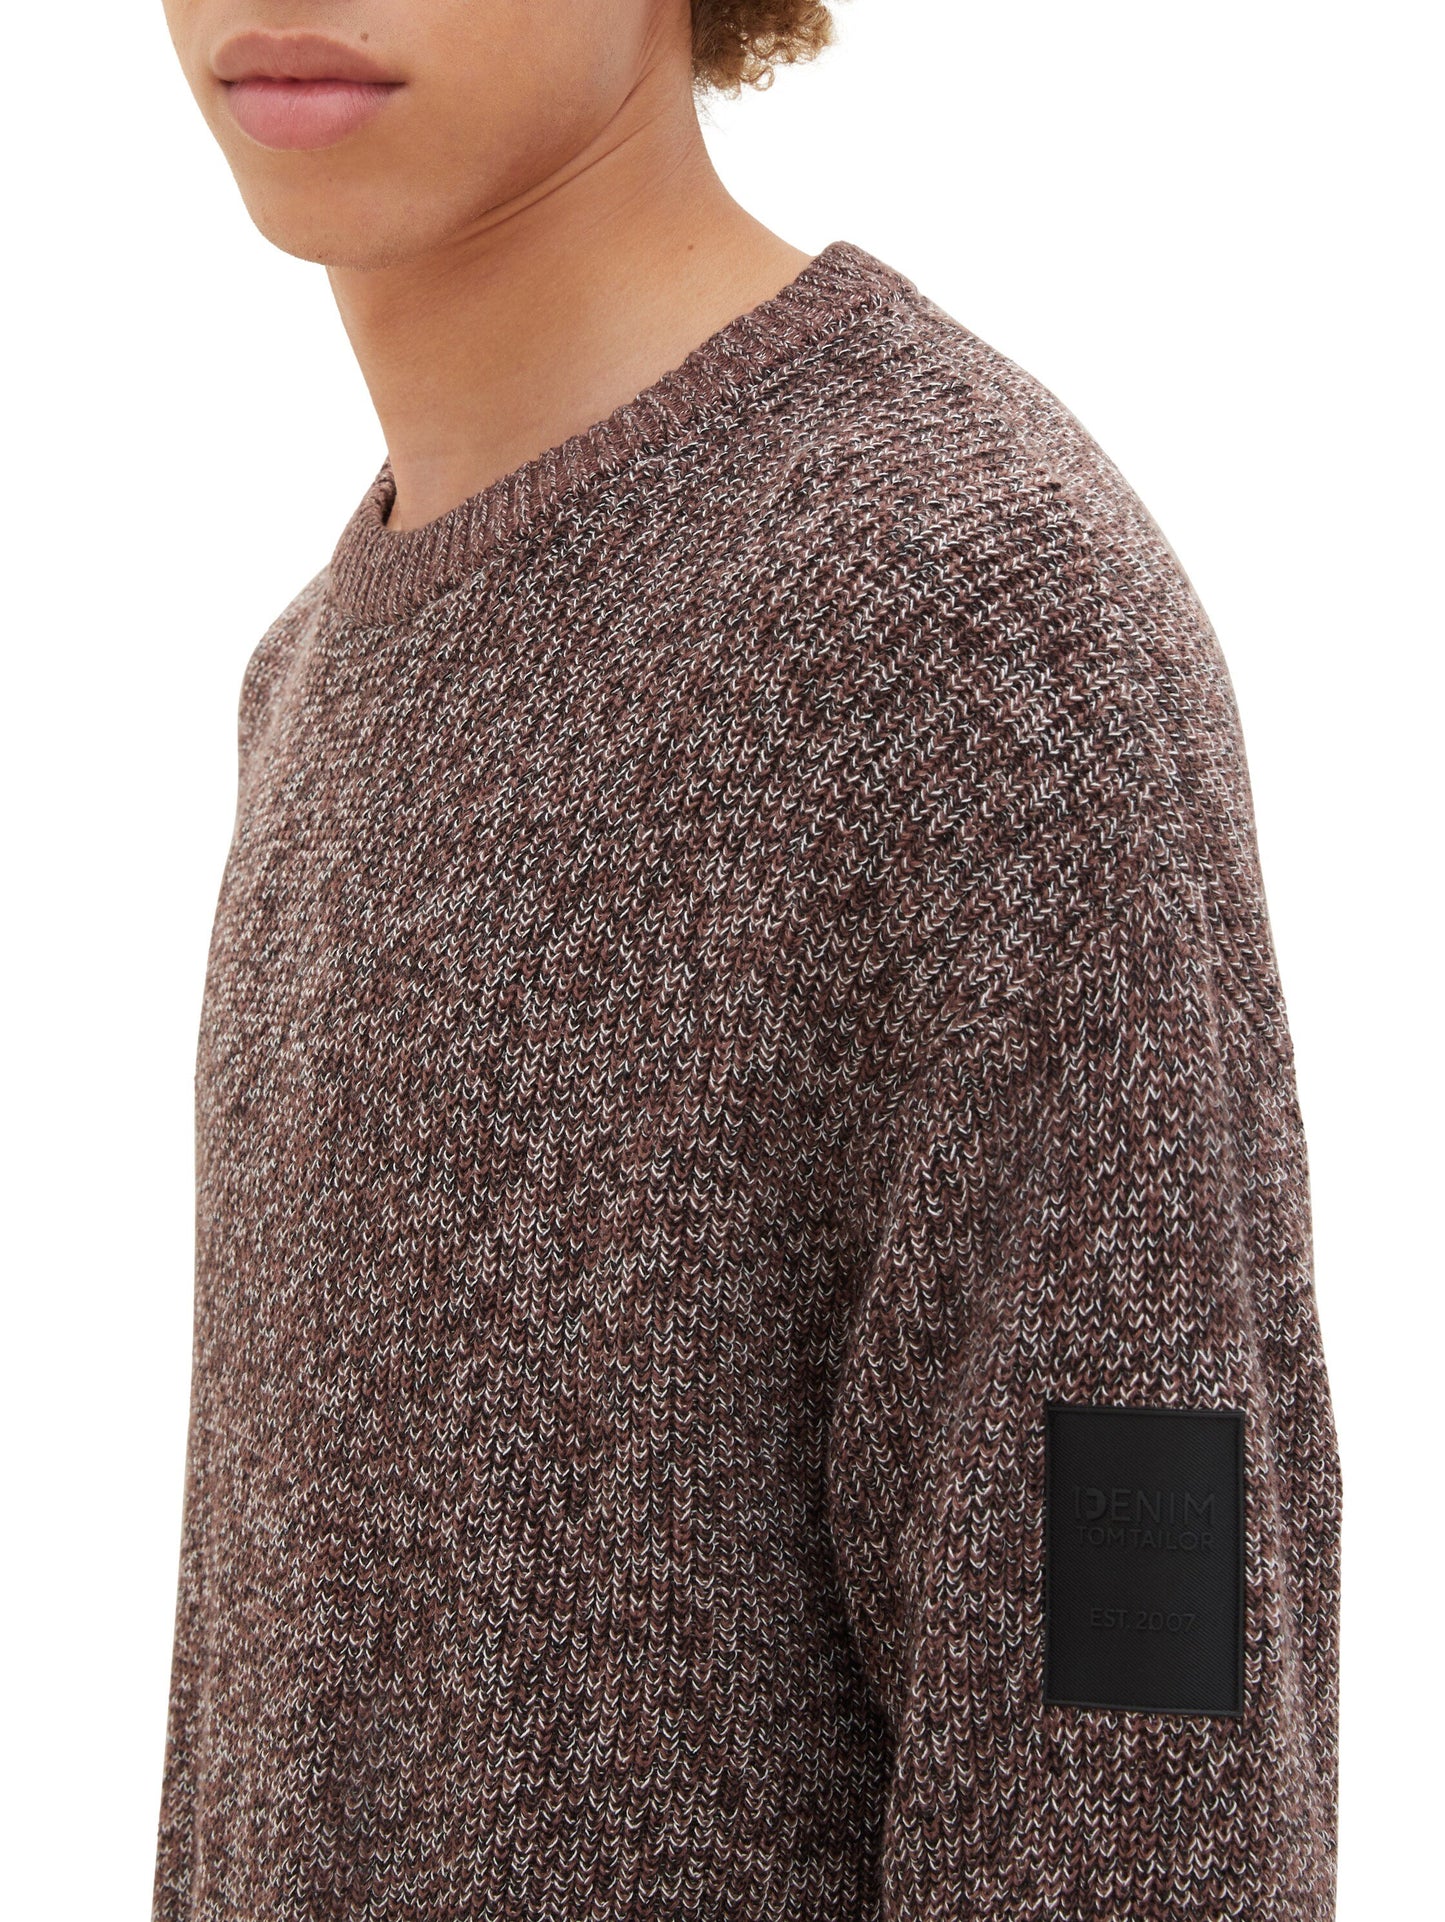 relaxed multicolor knit (Russet Brown M)